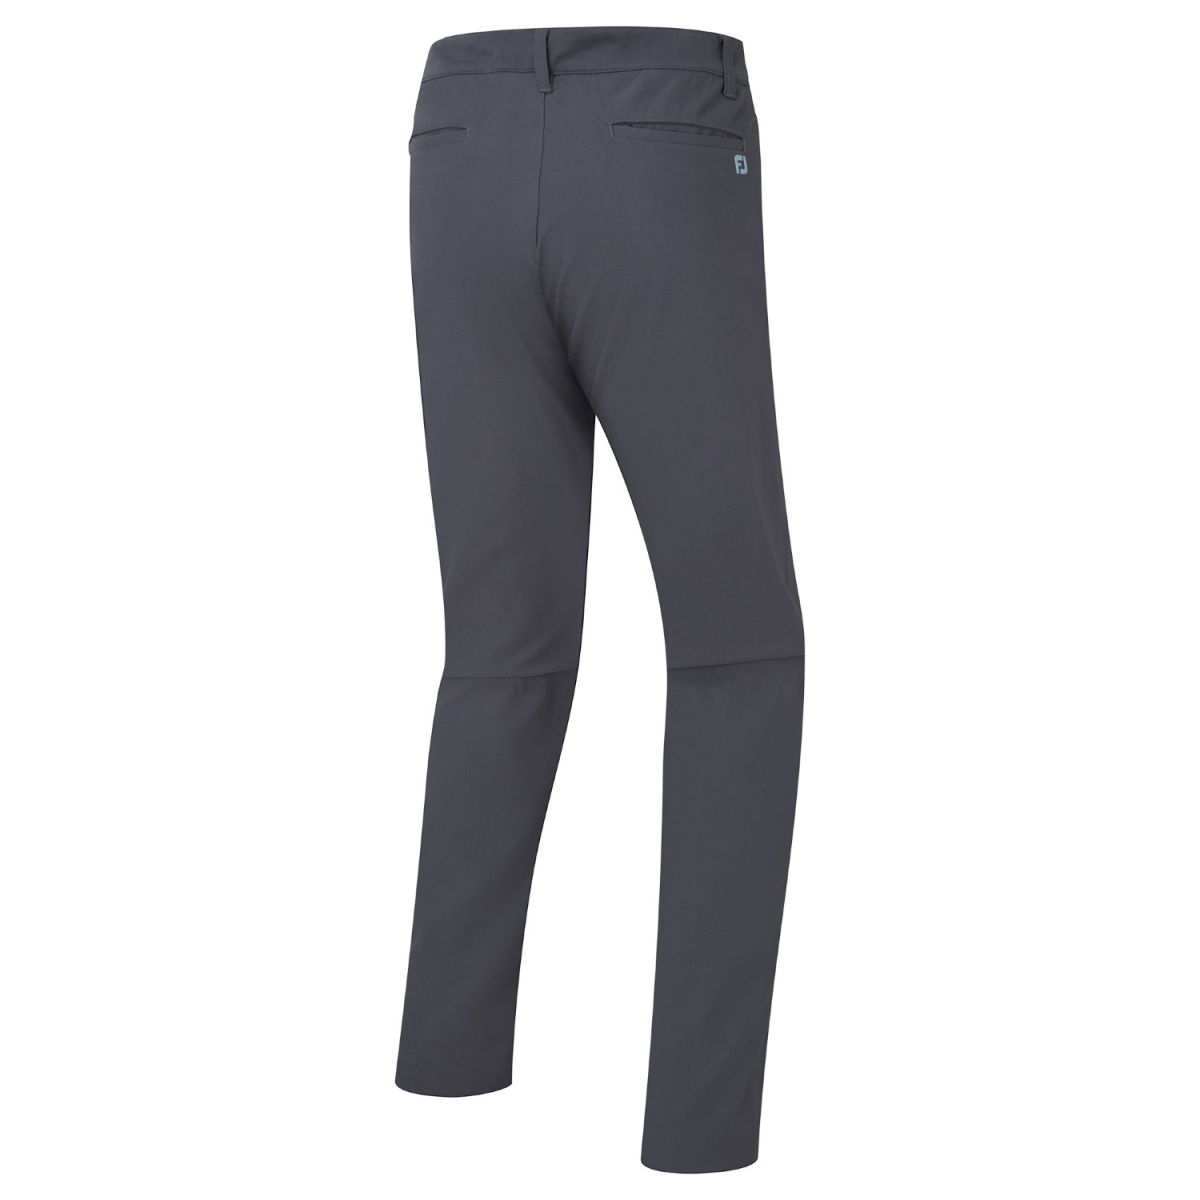 fj pant thermoseries charcoal 3032